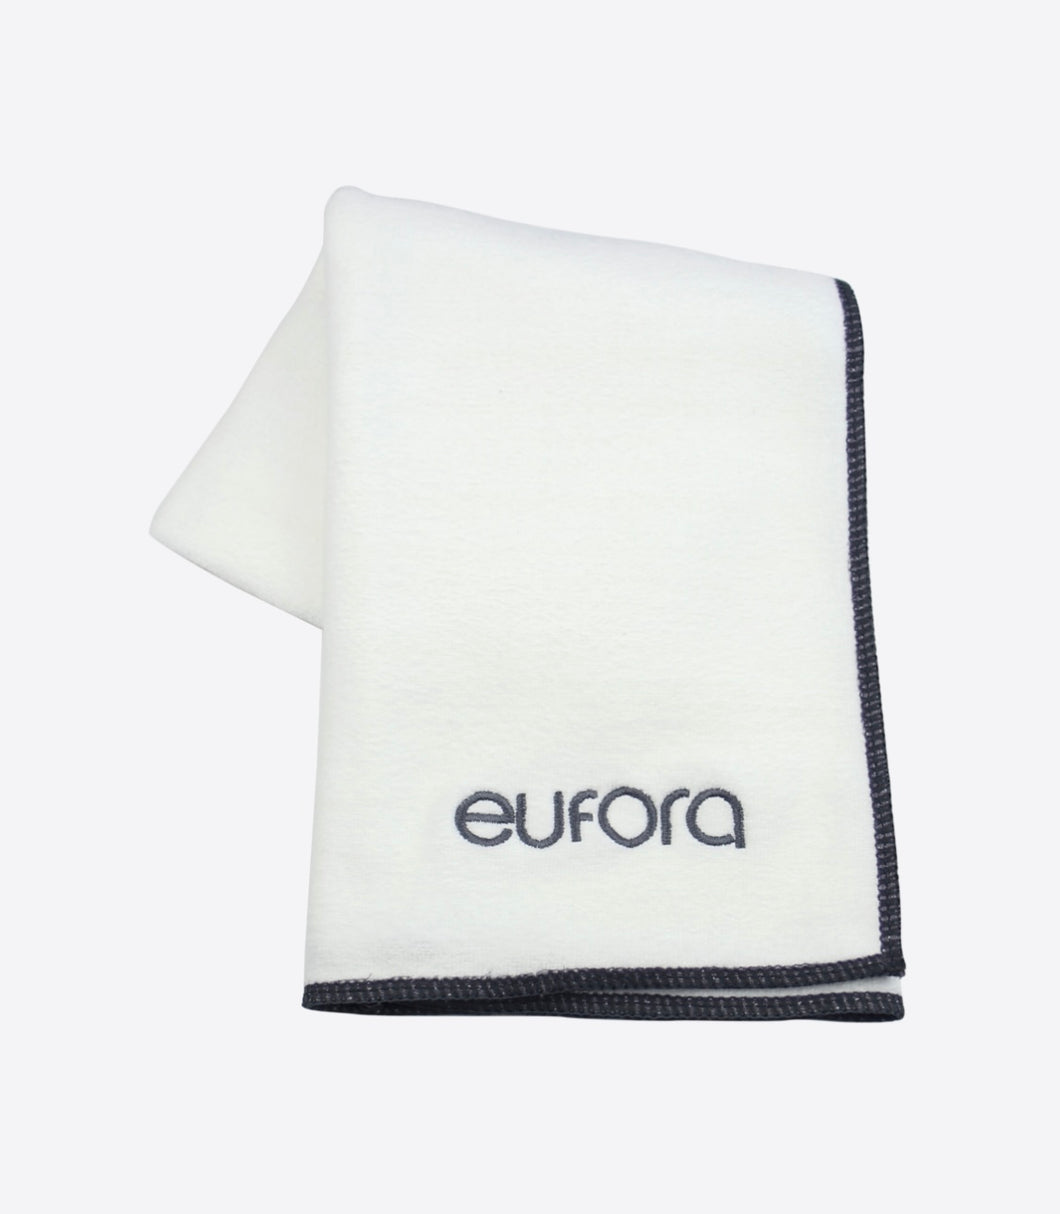 Eufora Microfiber Towel. Treat your tresses with this super absorbent lint free microfiber towel.Reduce Frizz, Protect Shine. Always Blot. Never Rub. 